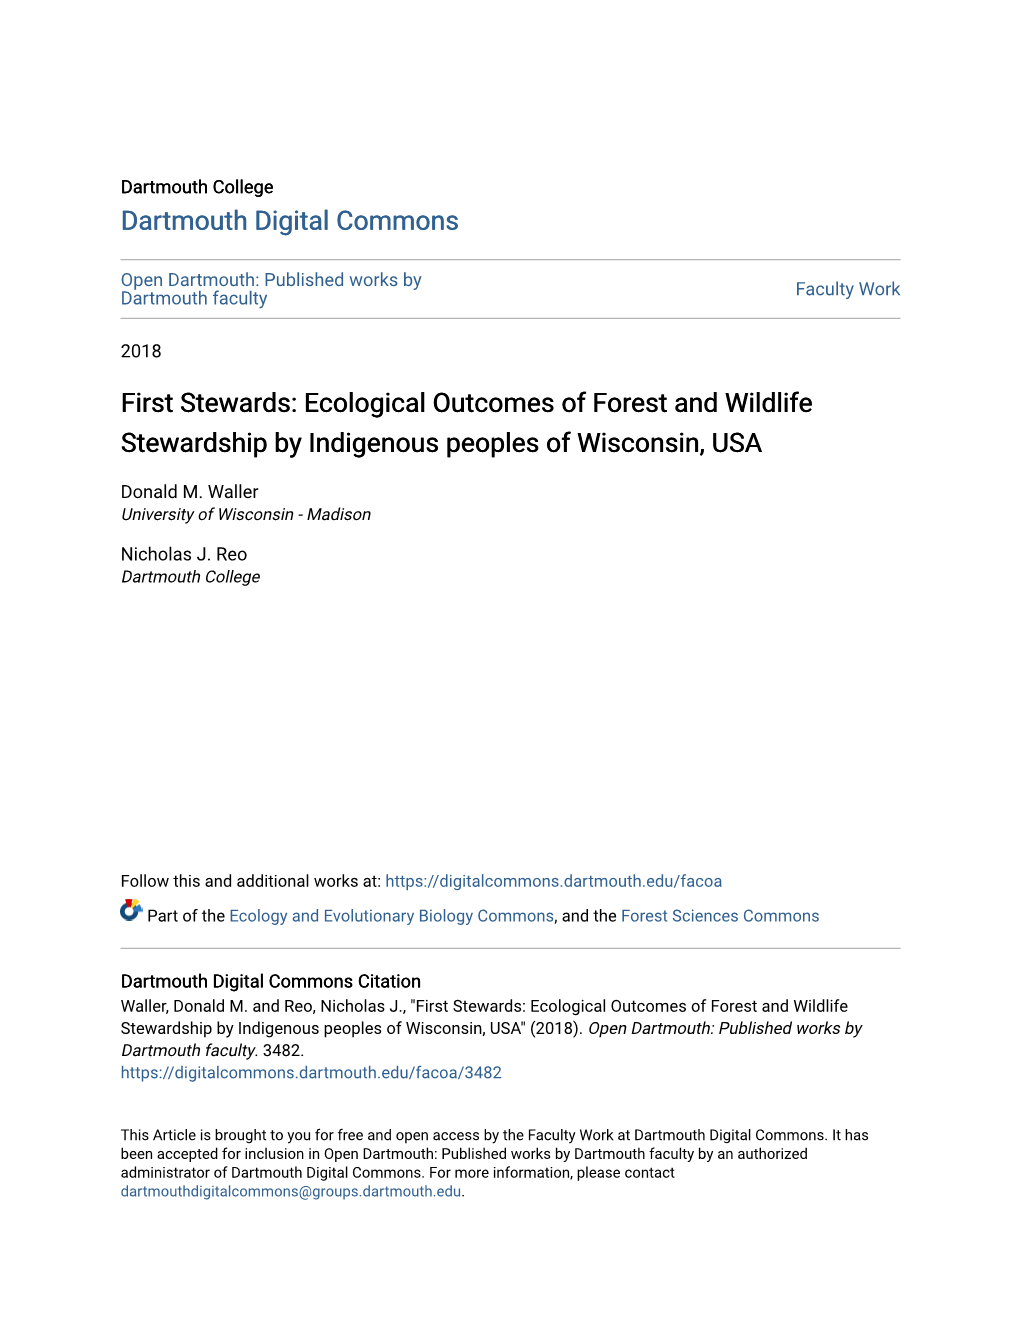 Ecological Outcomes of Forest and Wildlife Stewardship by Indigenous Peoples of Wisconsin, USA